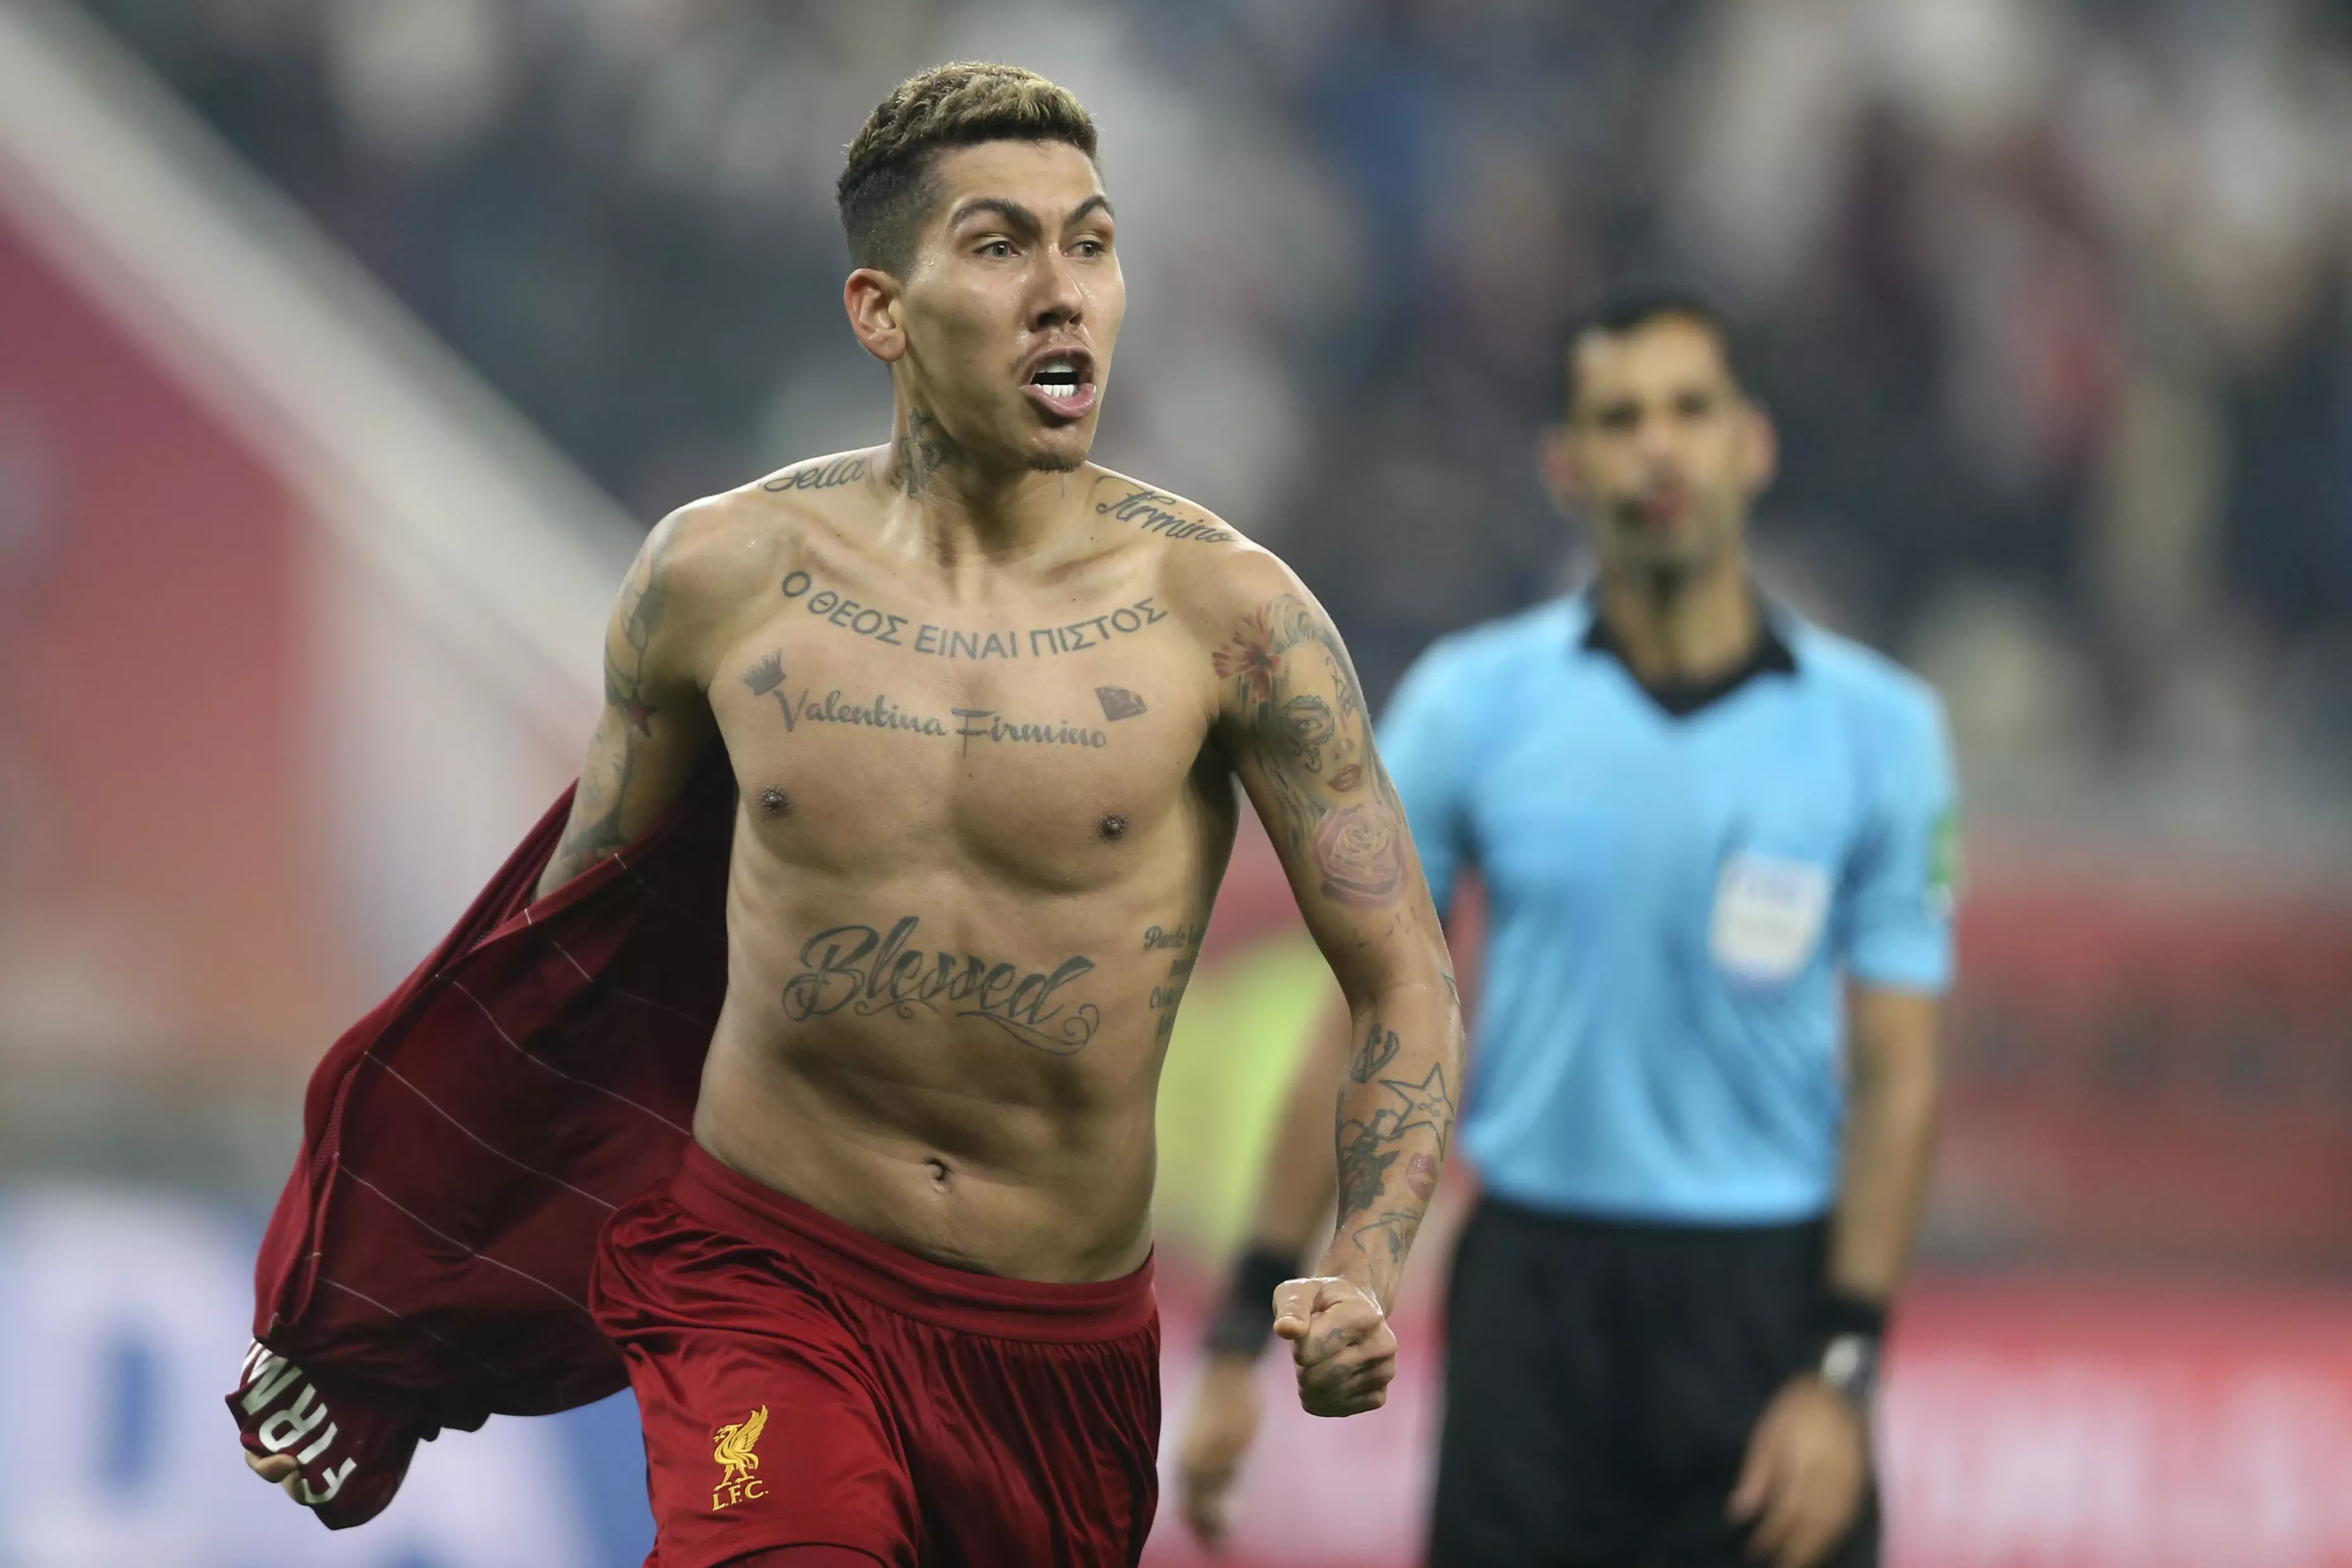 Firmino celebrates his goal. Image: PA Images